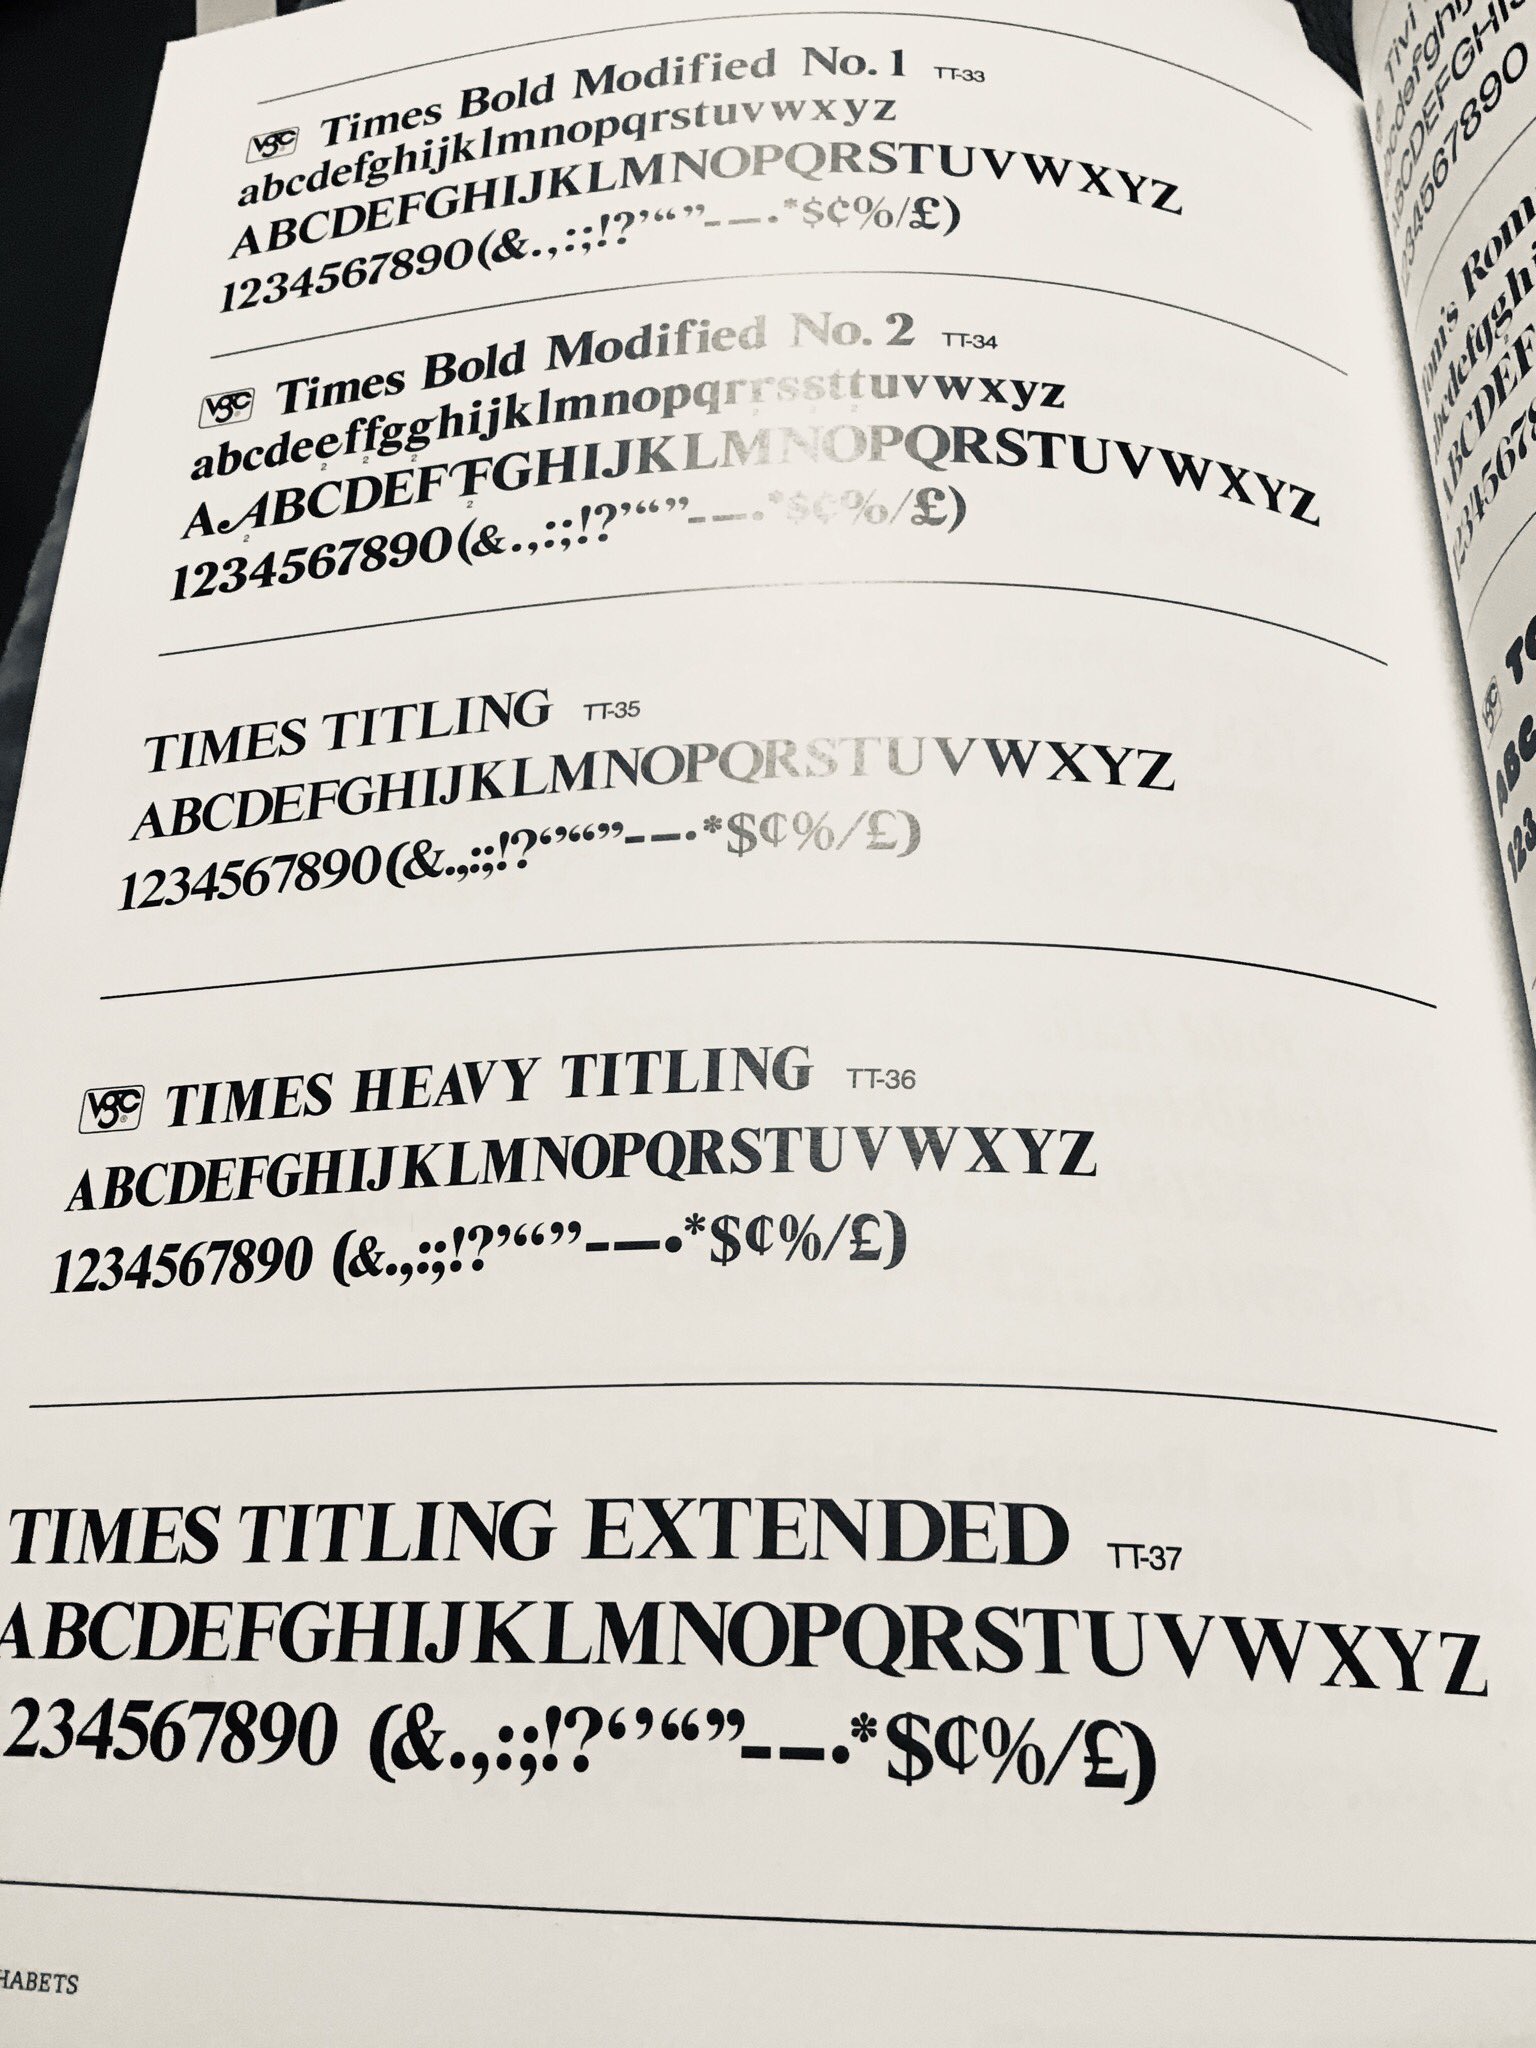 Times Modified No. 1, 2 and Times Titling